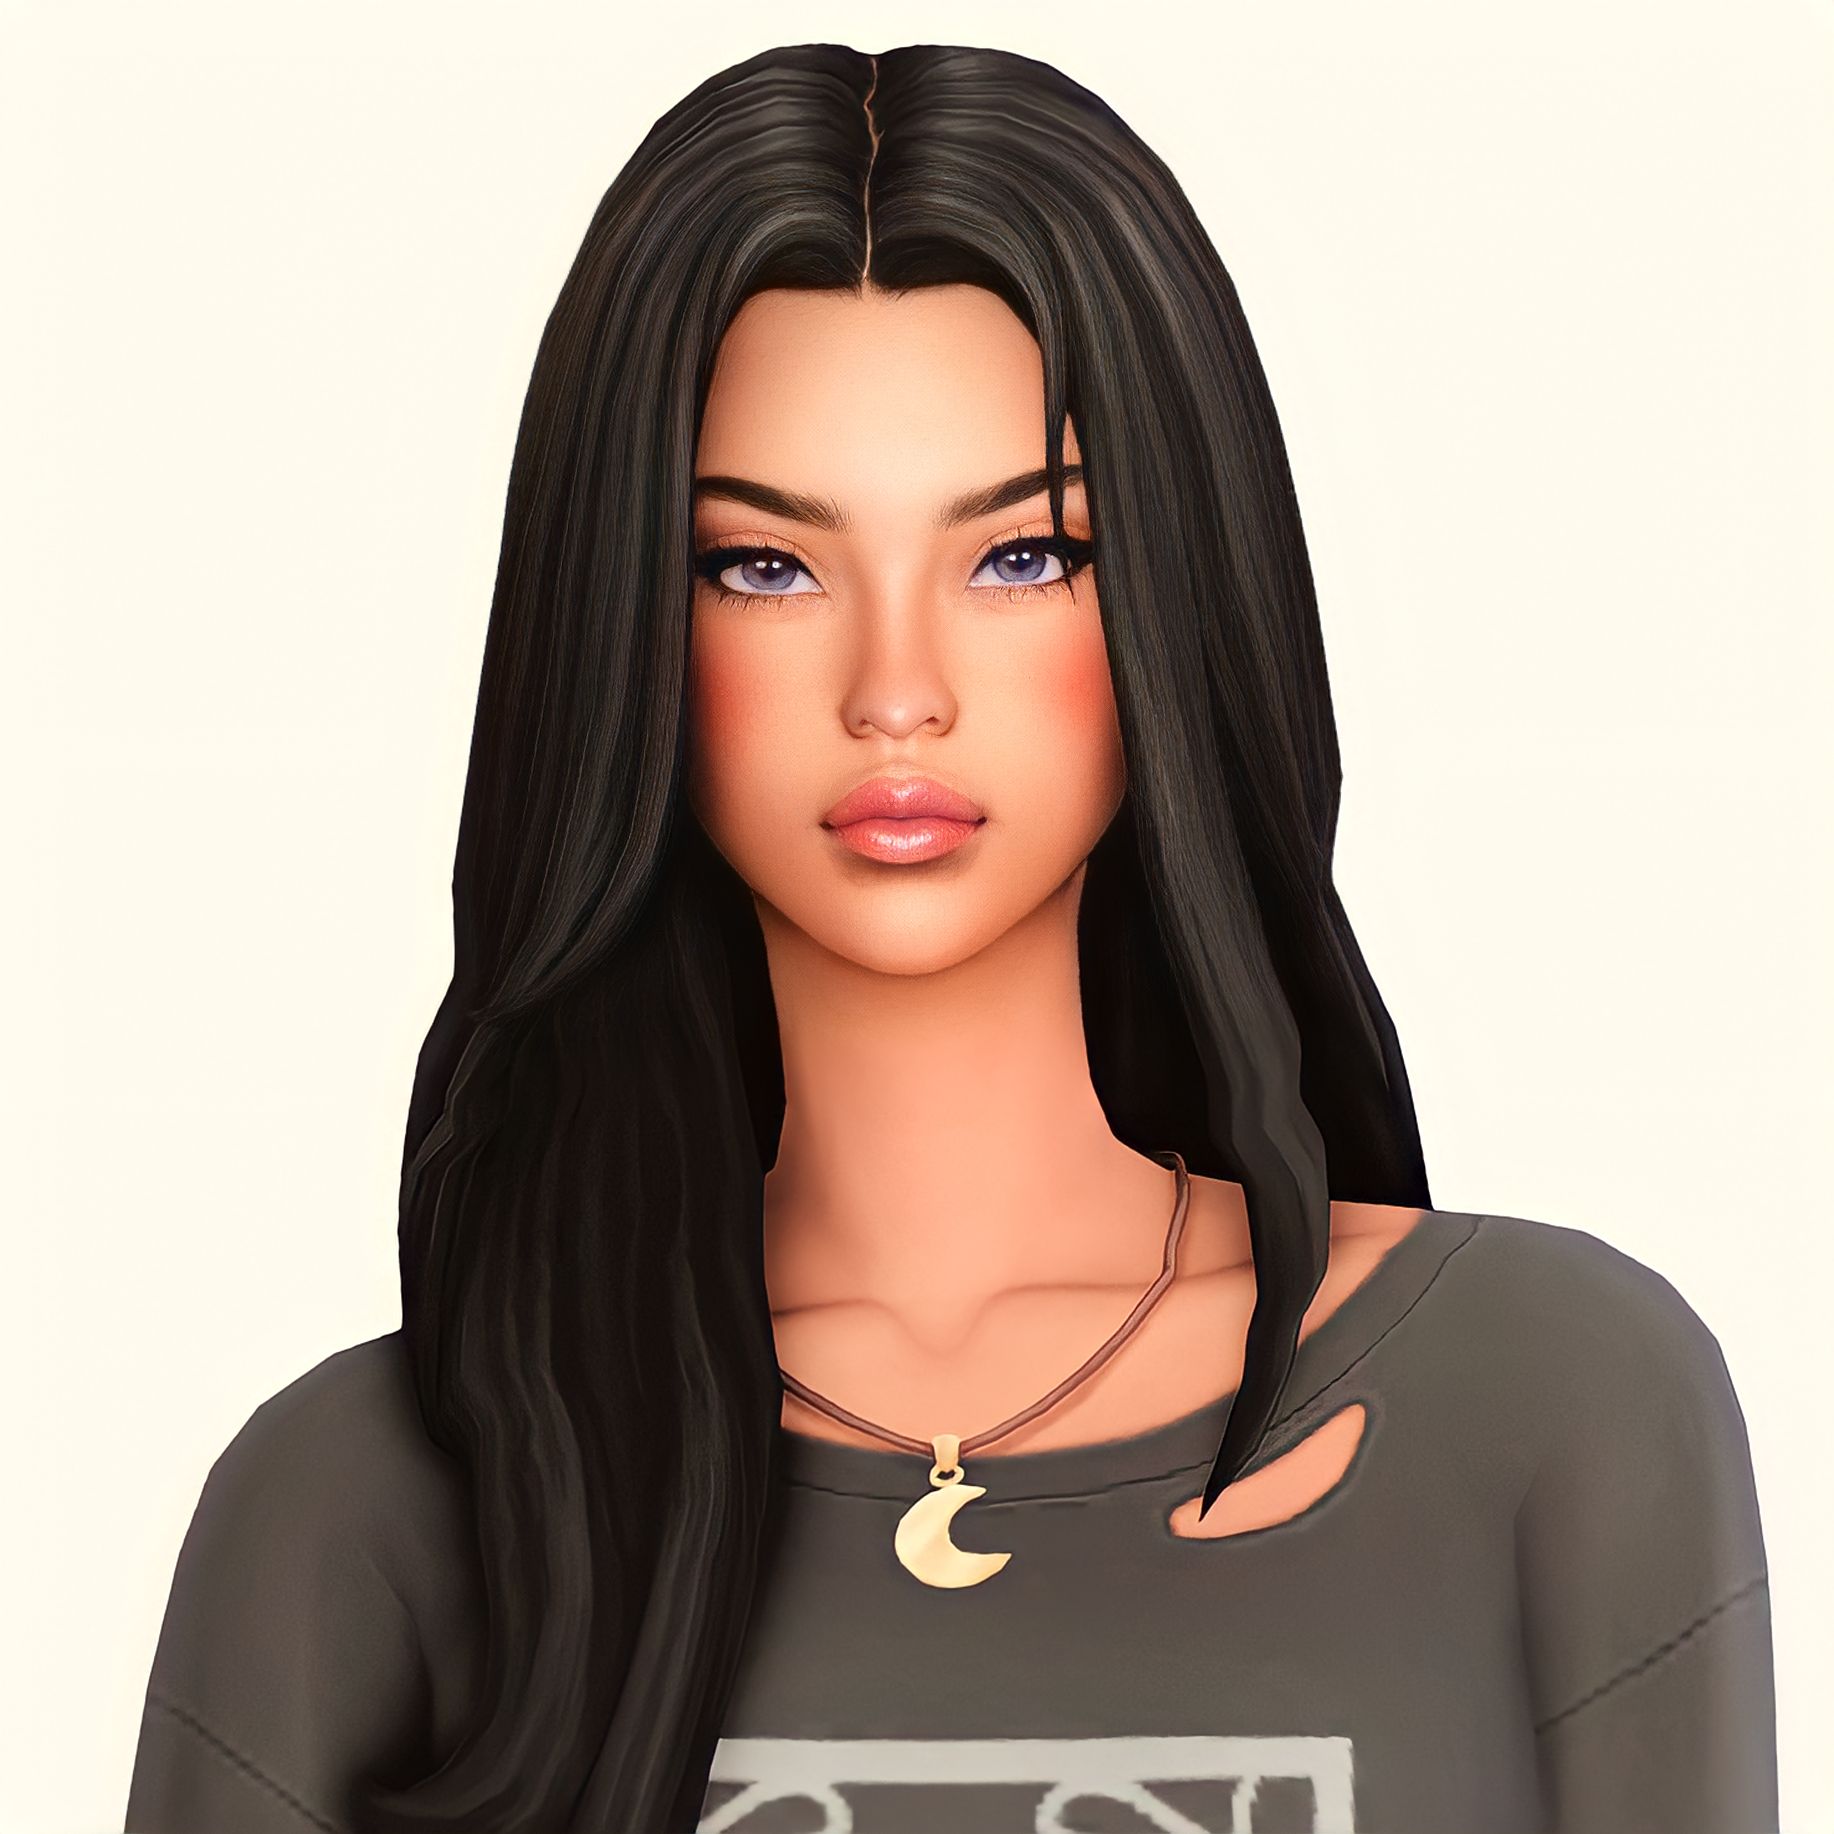 Lily Messina - The Werewolves Girl project avatar